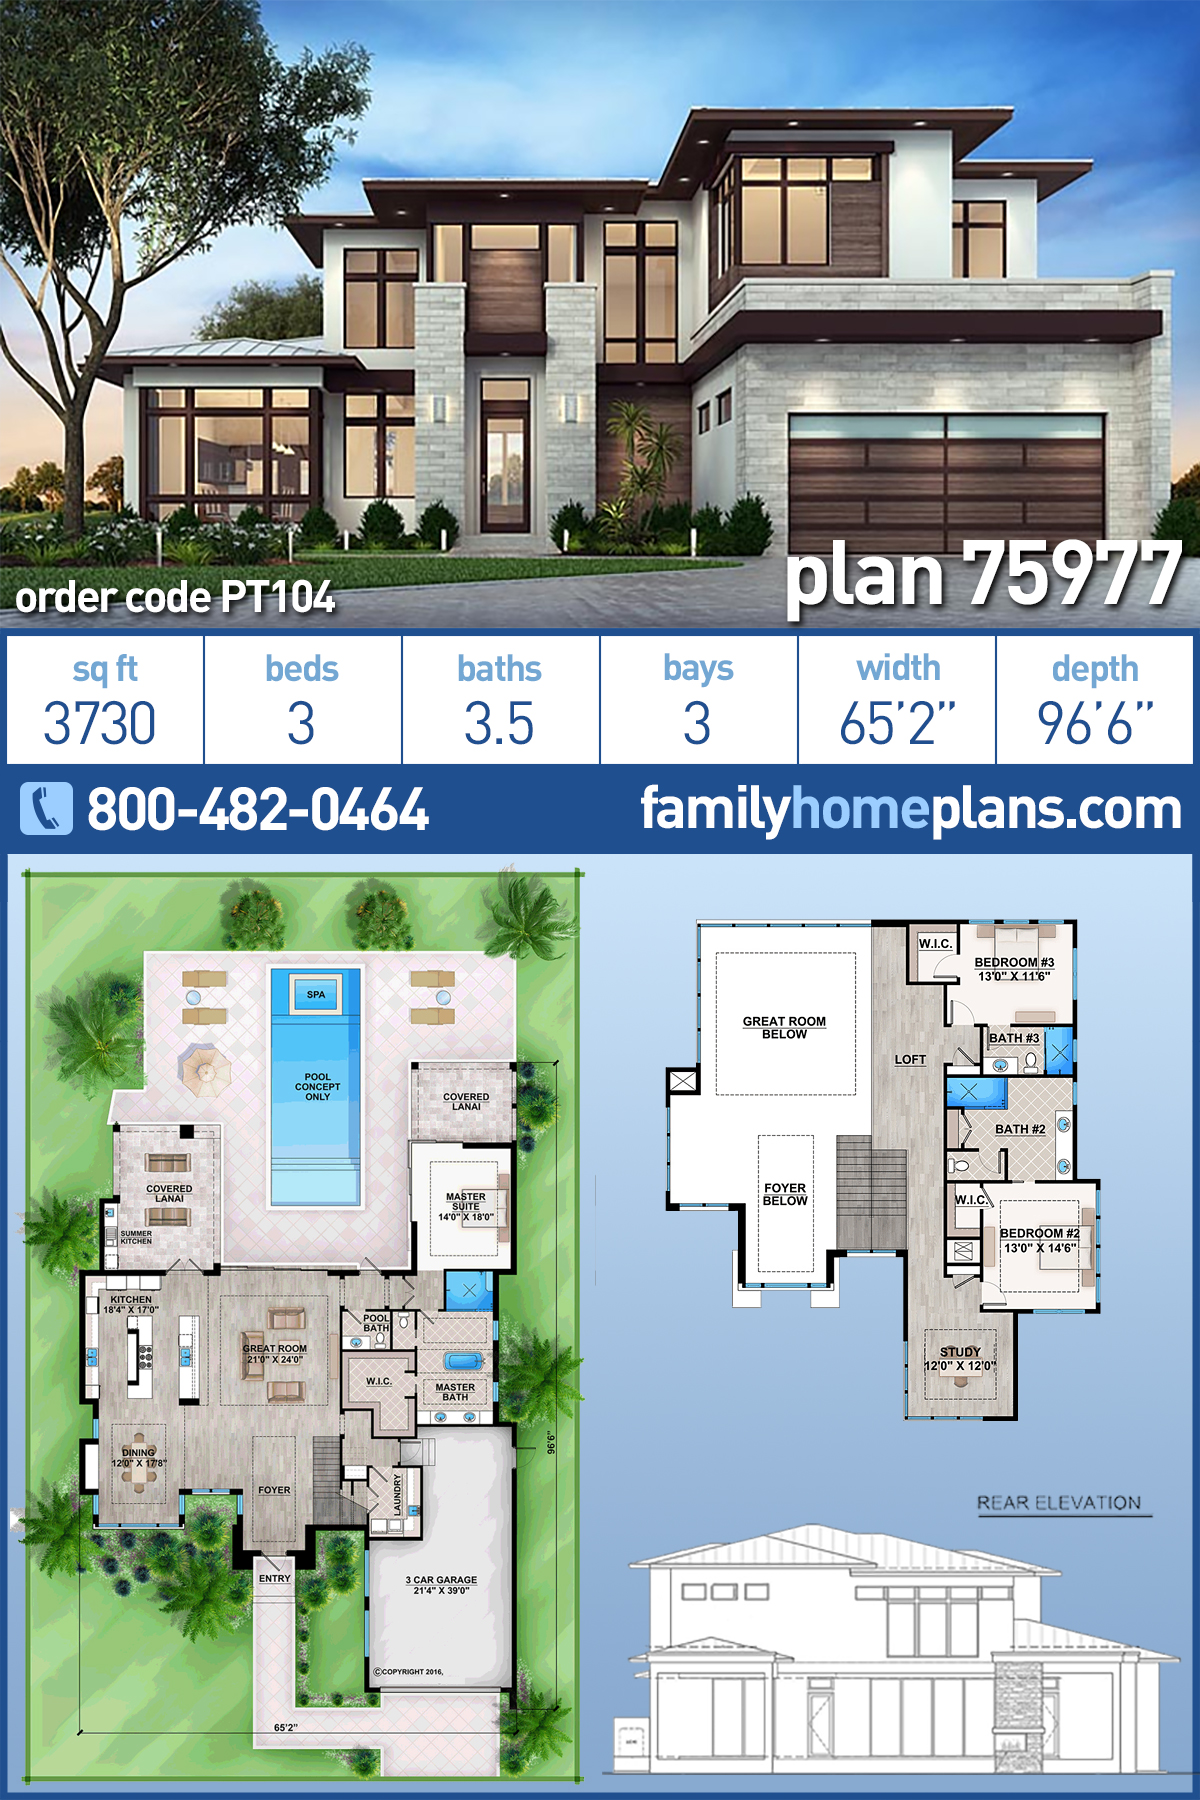 House Plan 75977 - Modern Style with 3730 Sq Ft, 3 Bed, 3 ...